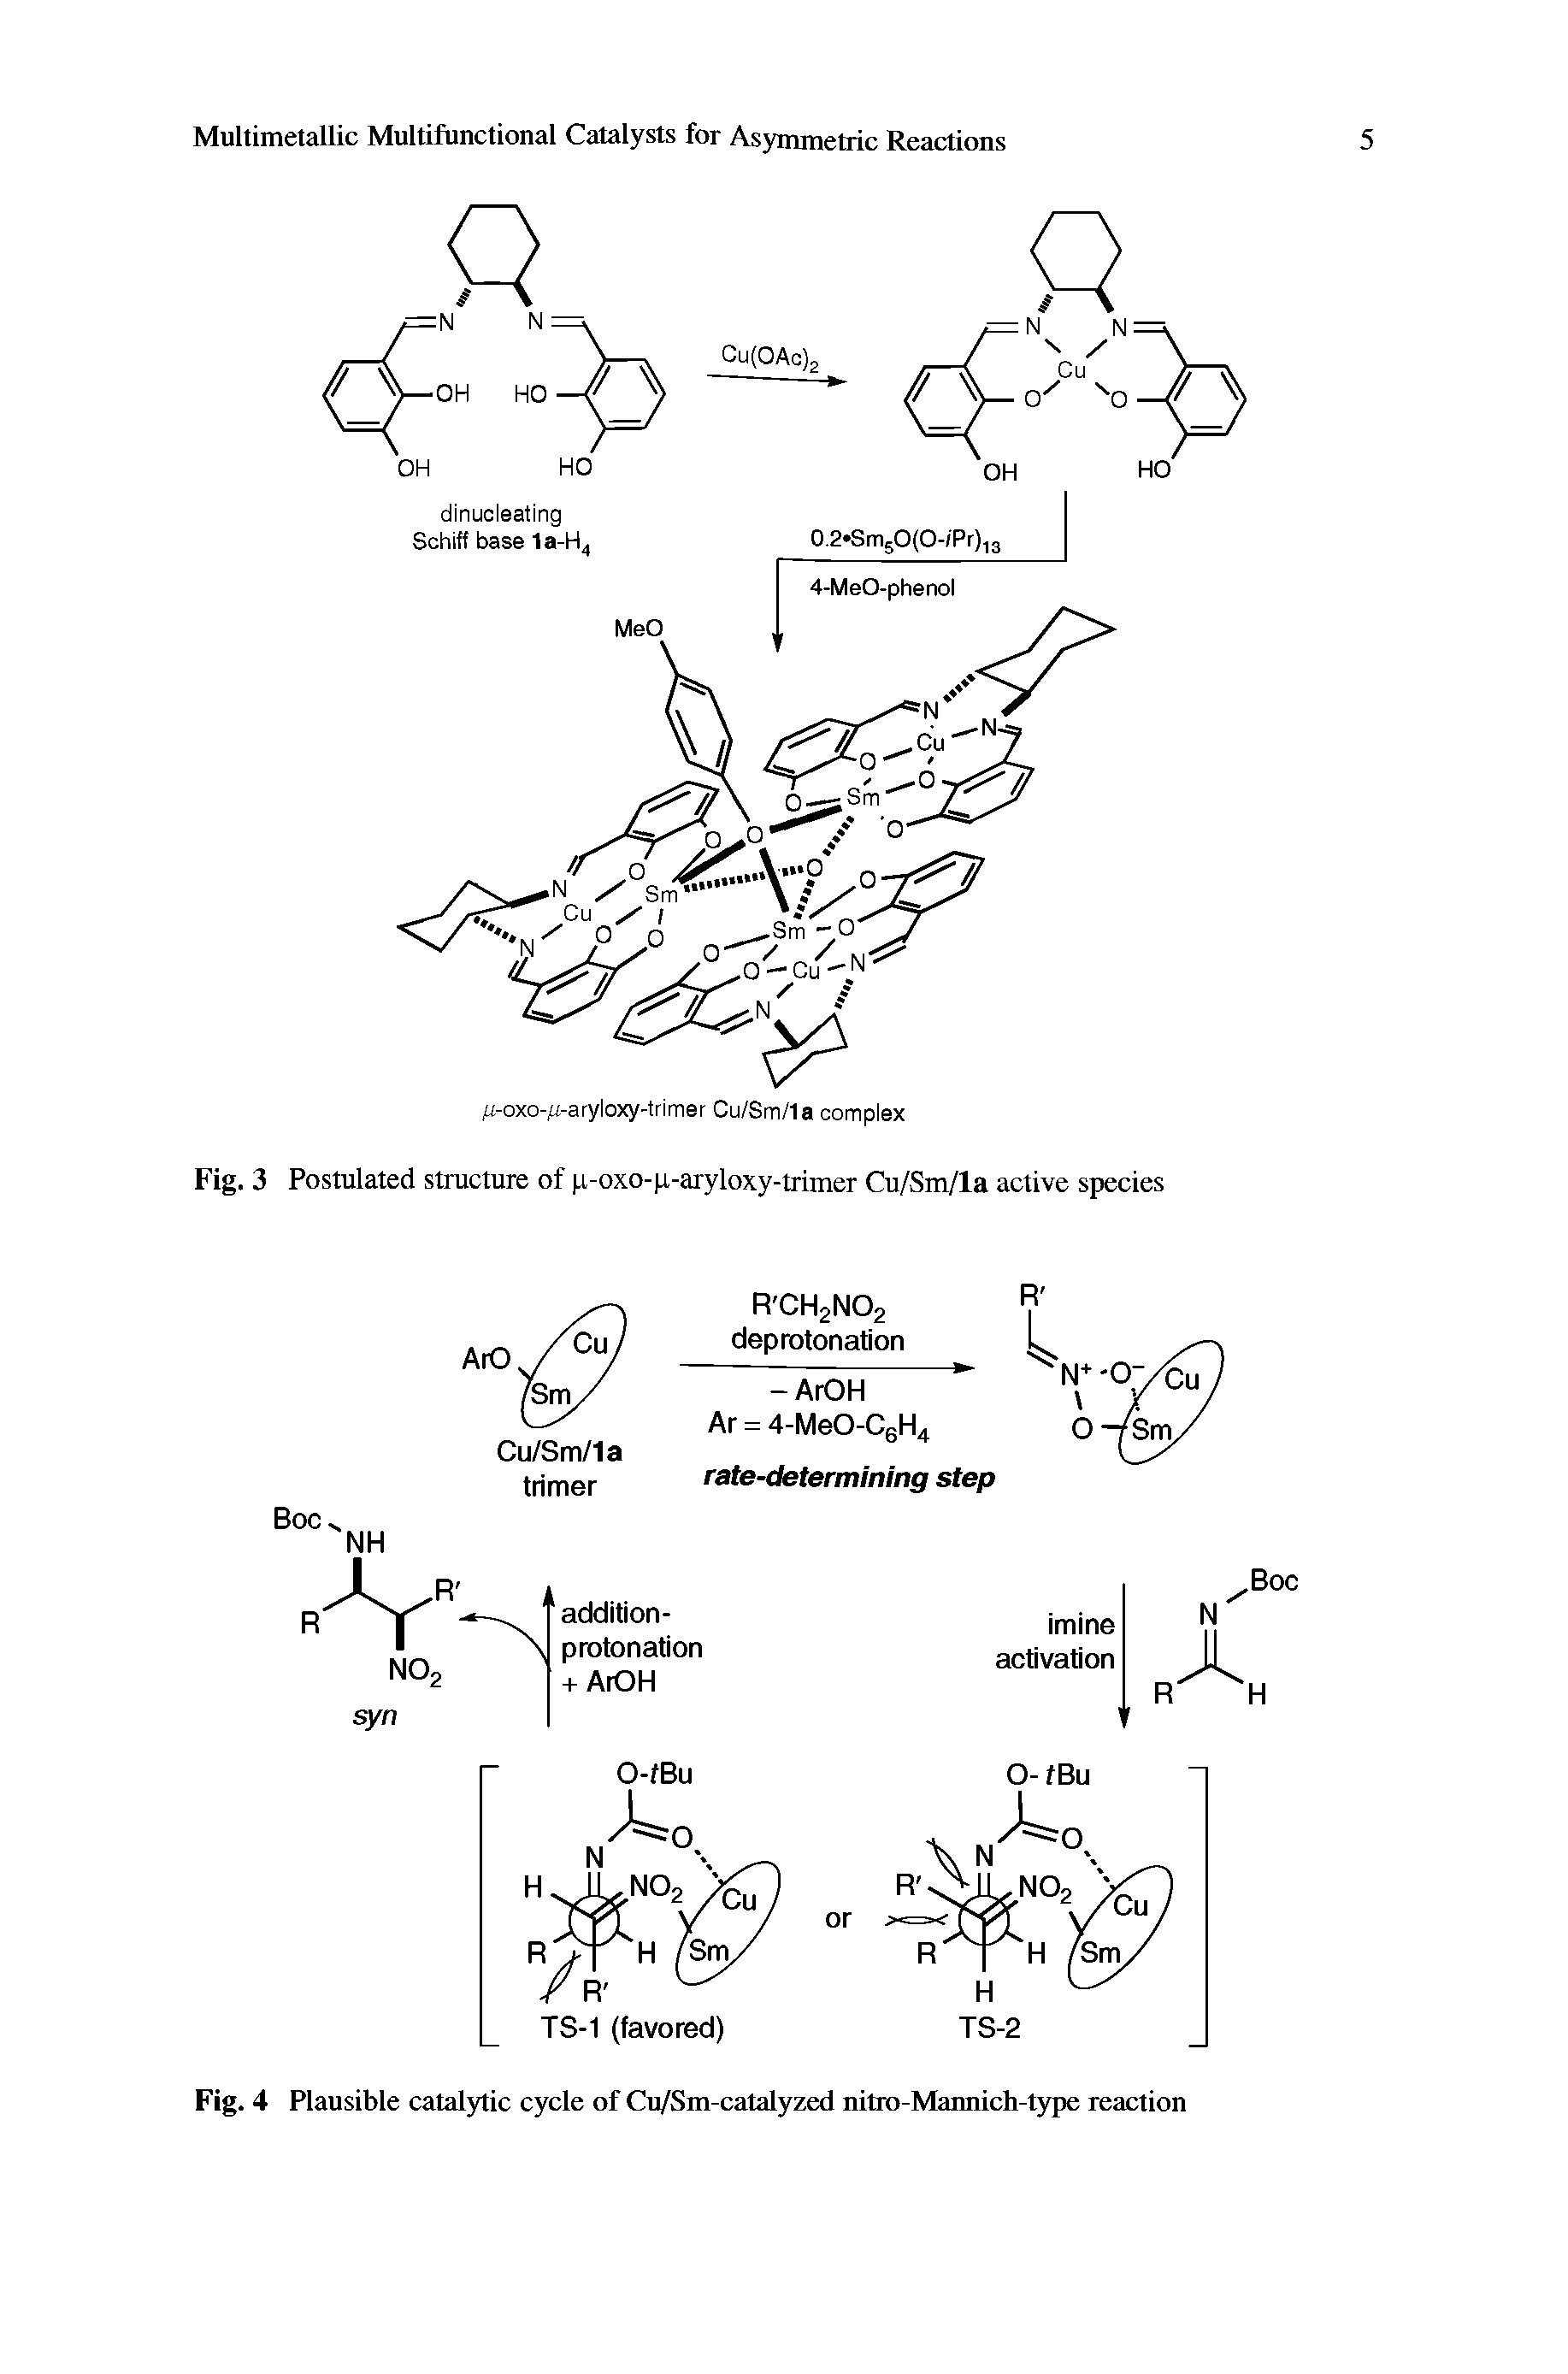 Fig. 4 Plausible catalytic cycle of Cu/Sm-eatalyzed nitro-Mannich-type reaction...